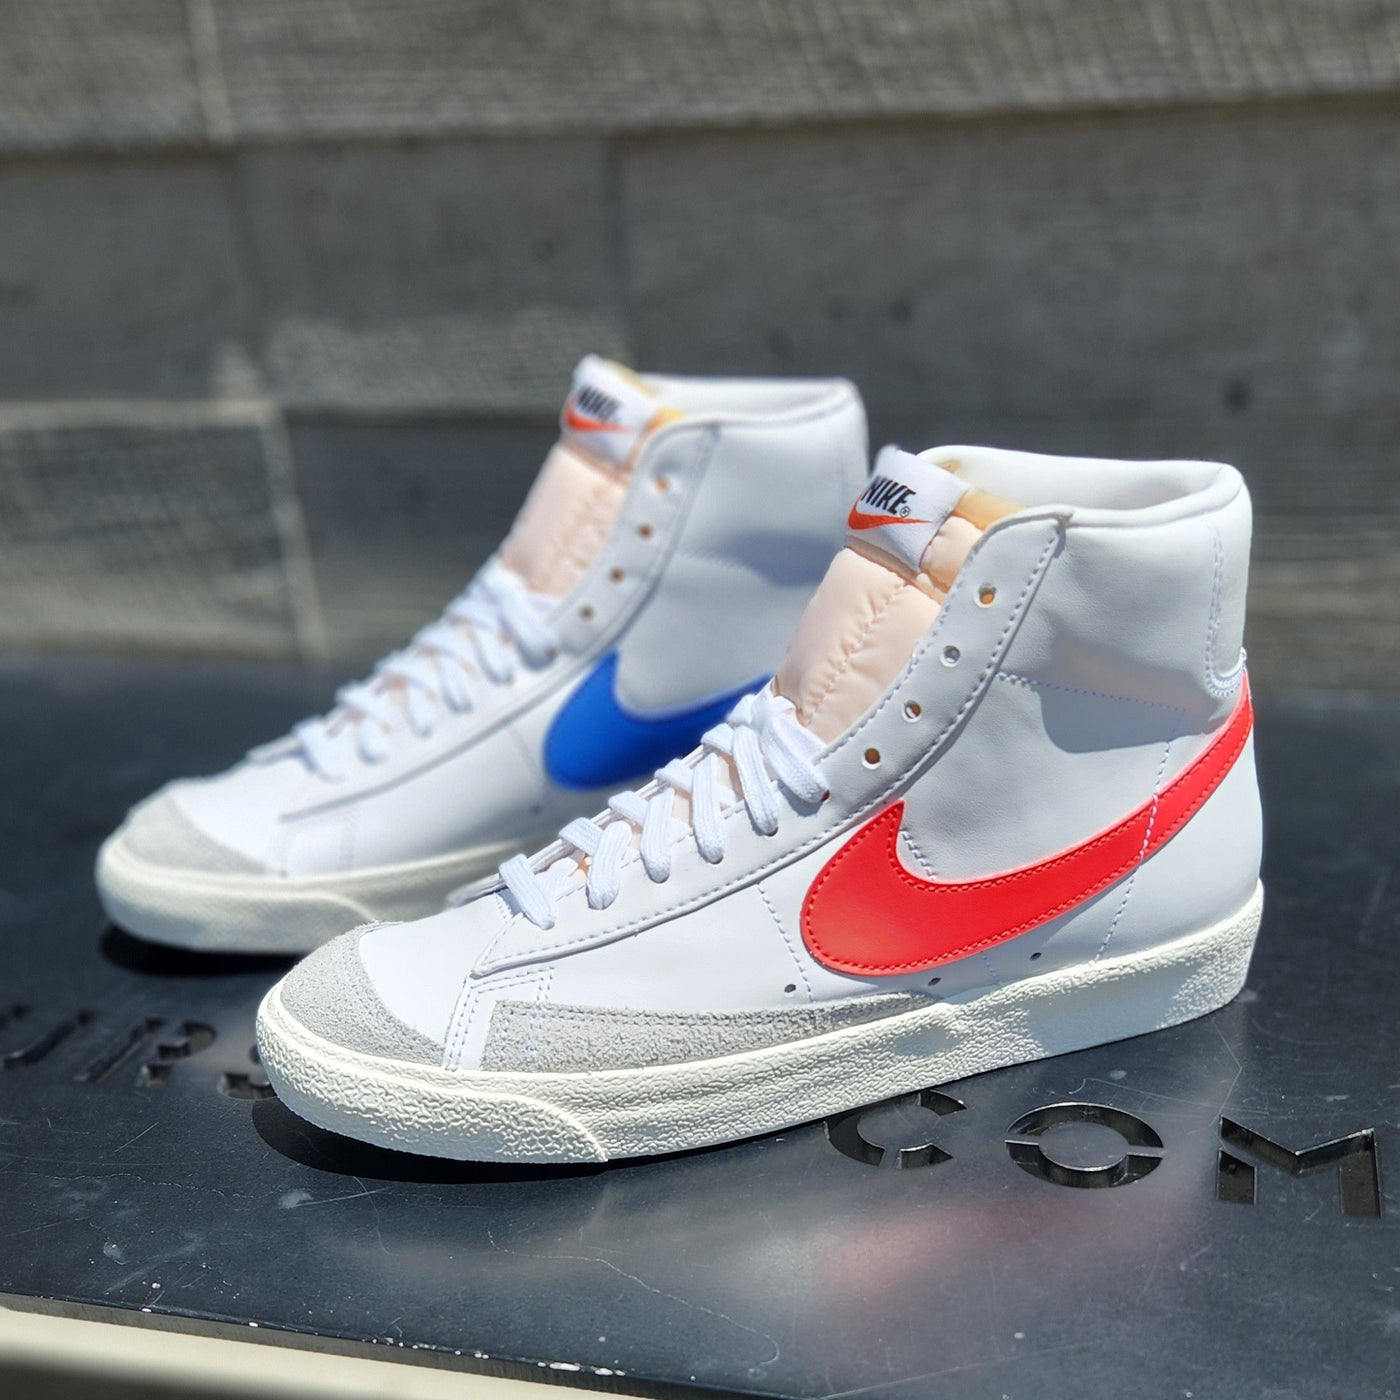 Nike Blazer Mid '77 Vintage Blue And Red Swooshes